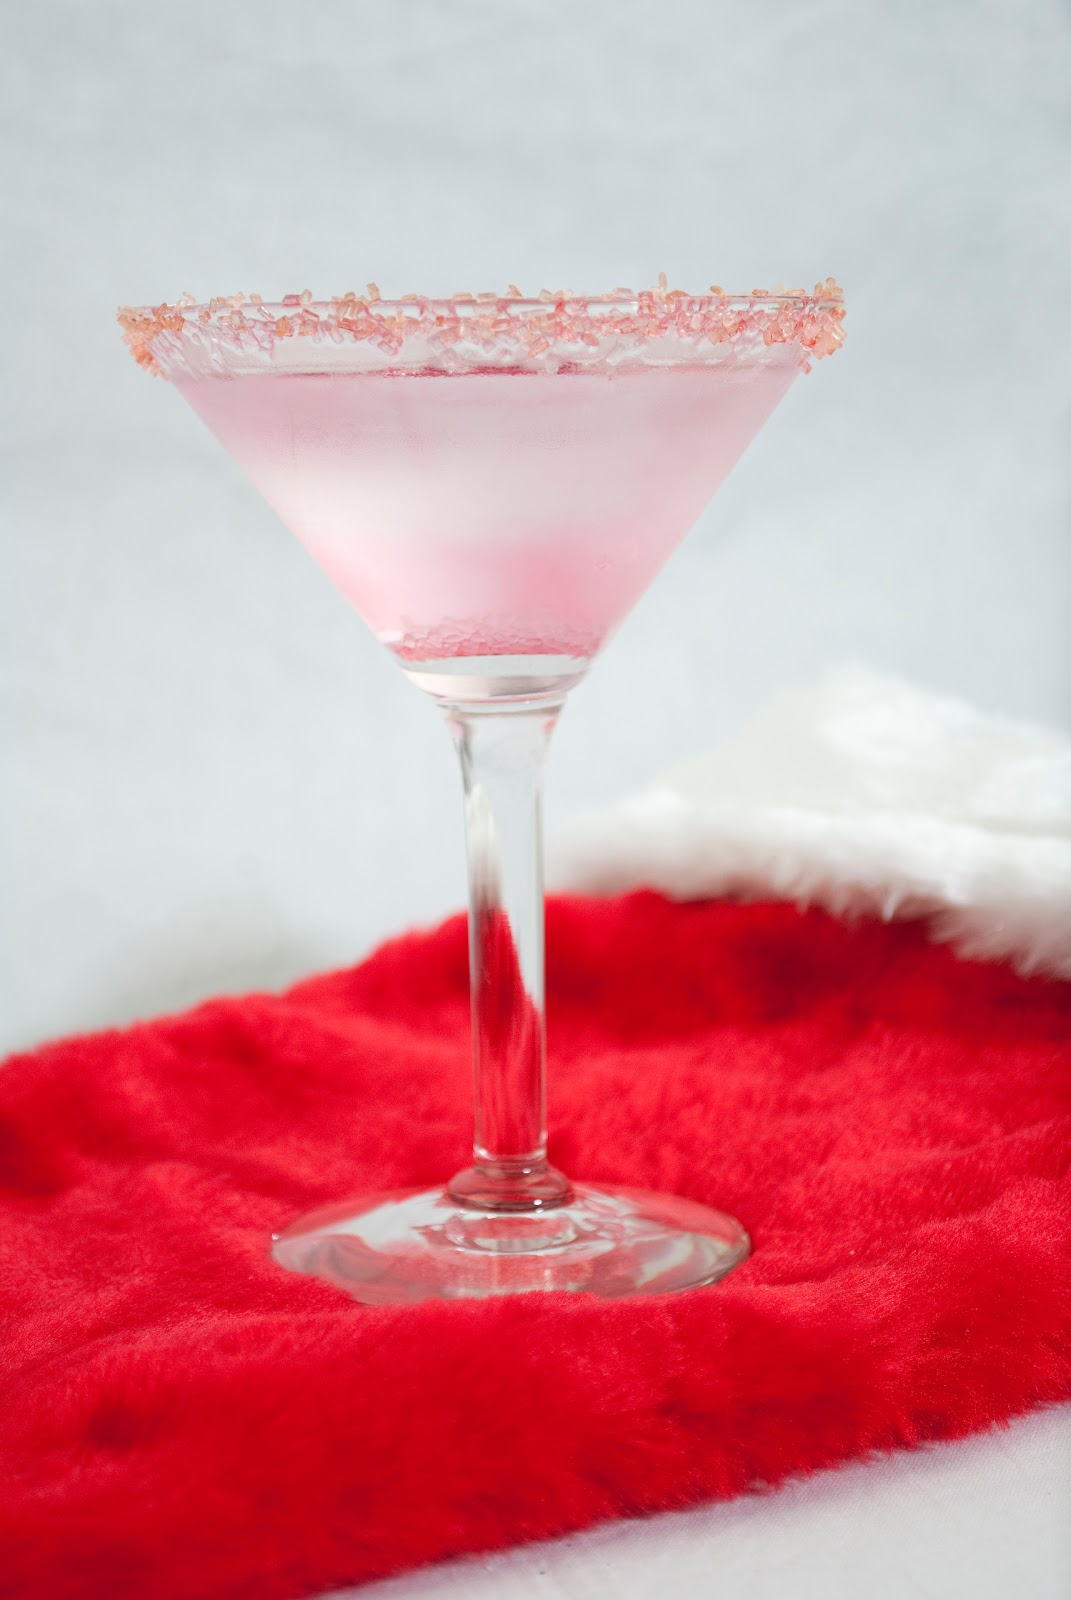 Candy Cane Martini - A Year Of Cocktails concernant Cocktail Bonbon Candy Cane Spritzer Cocktail 